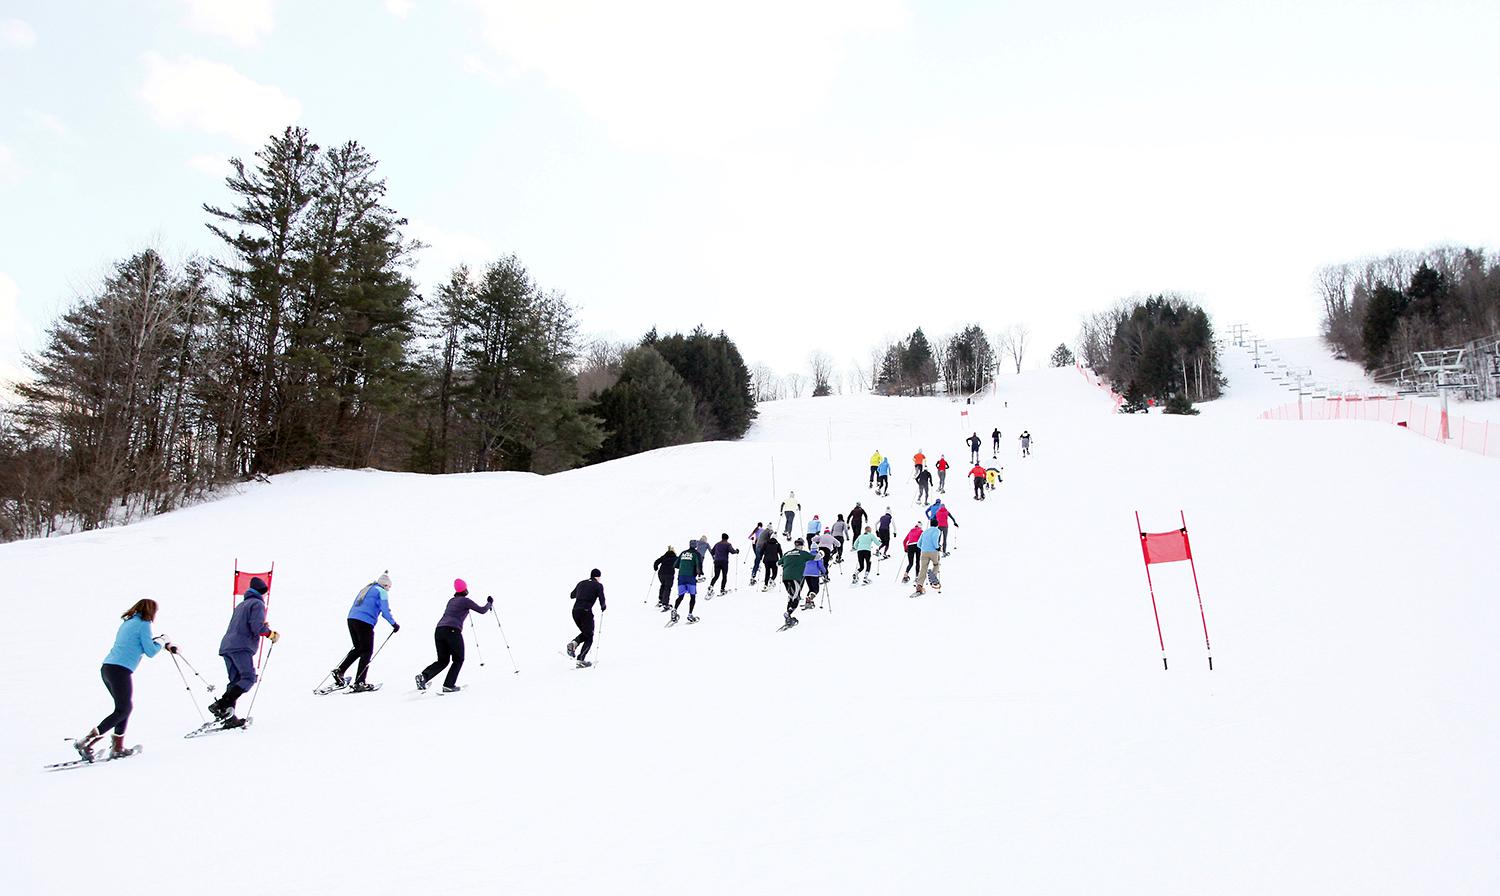 Fifth Annual Snowshoe 